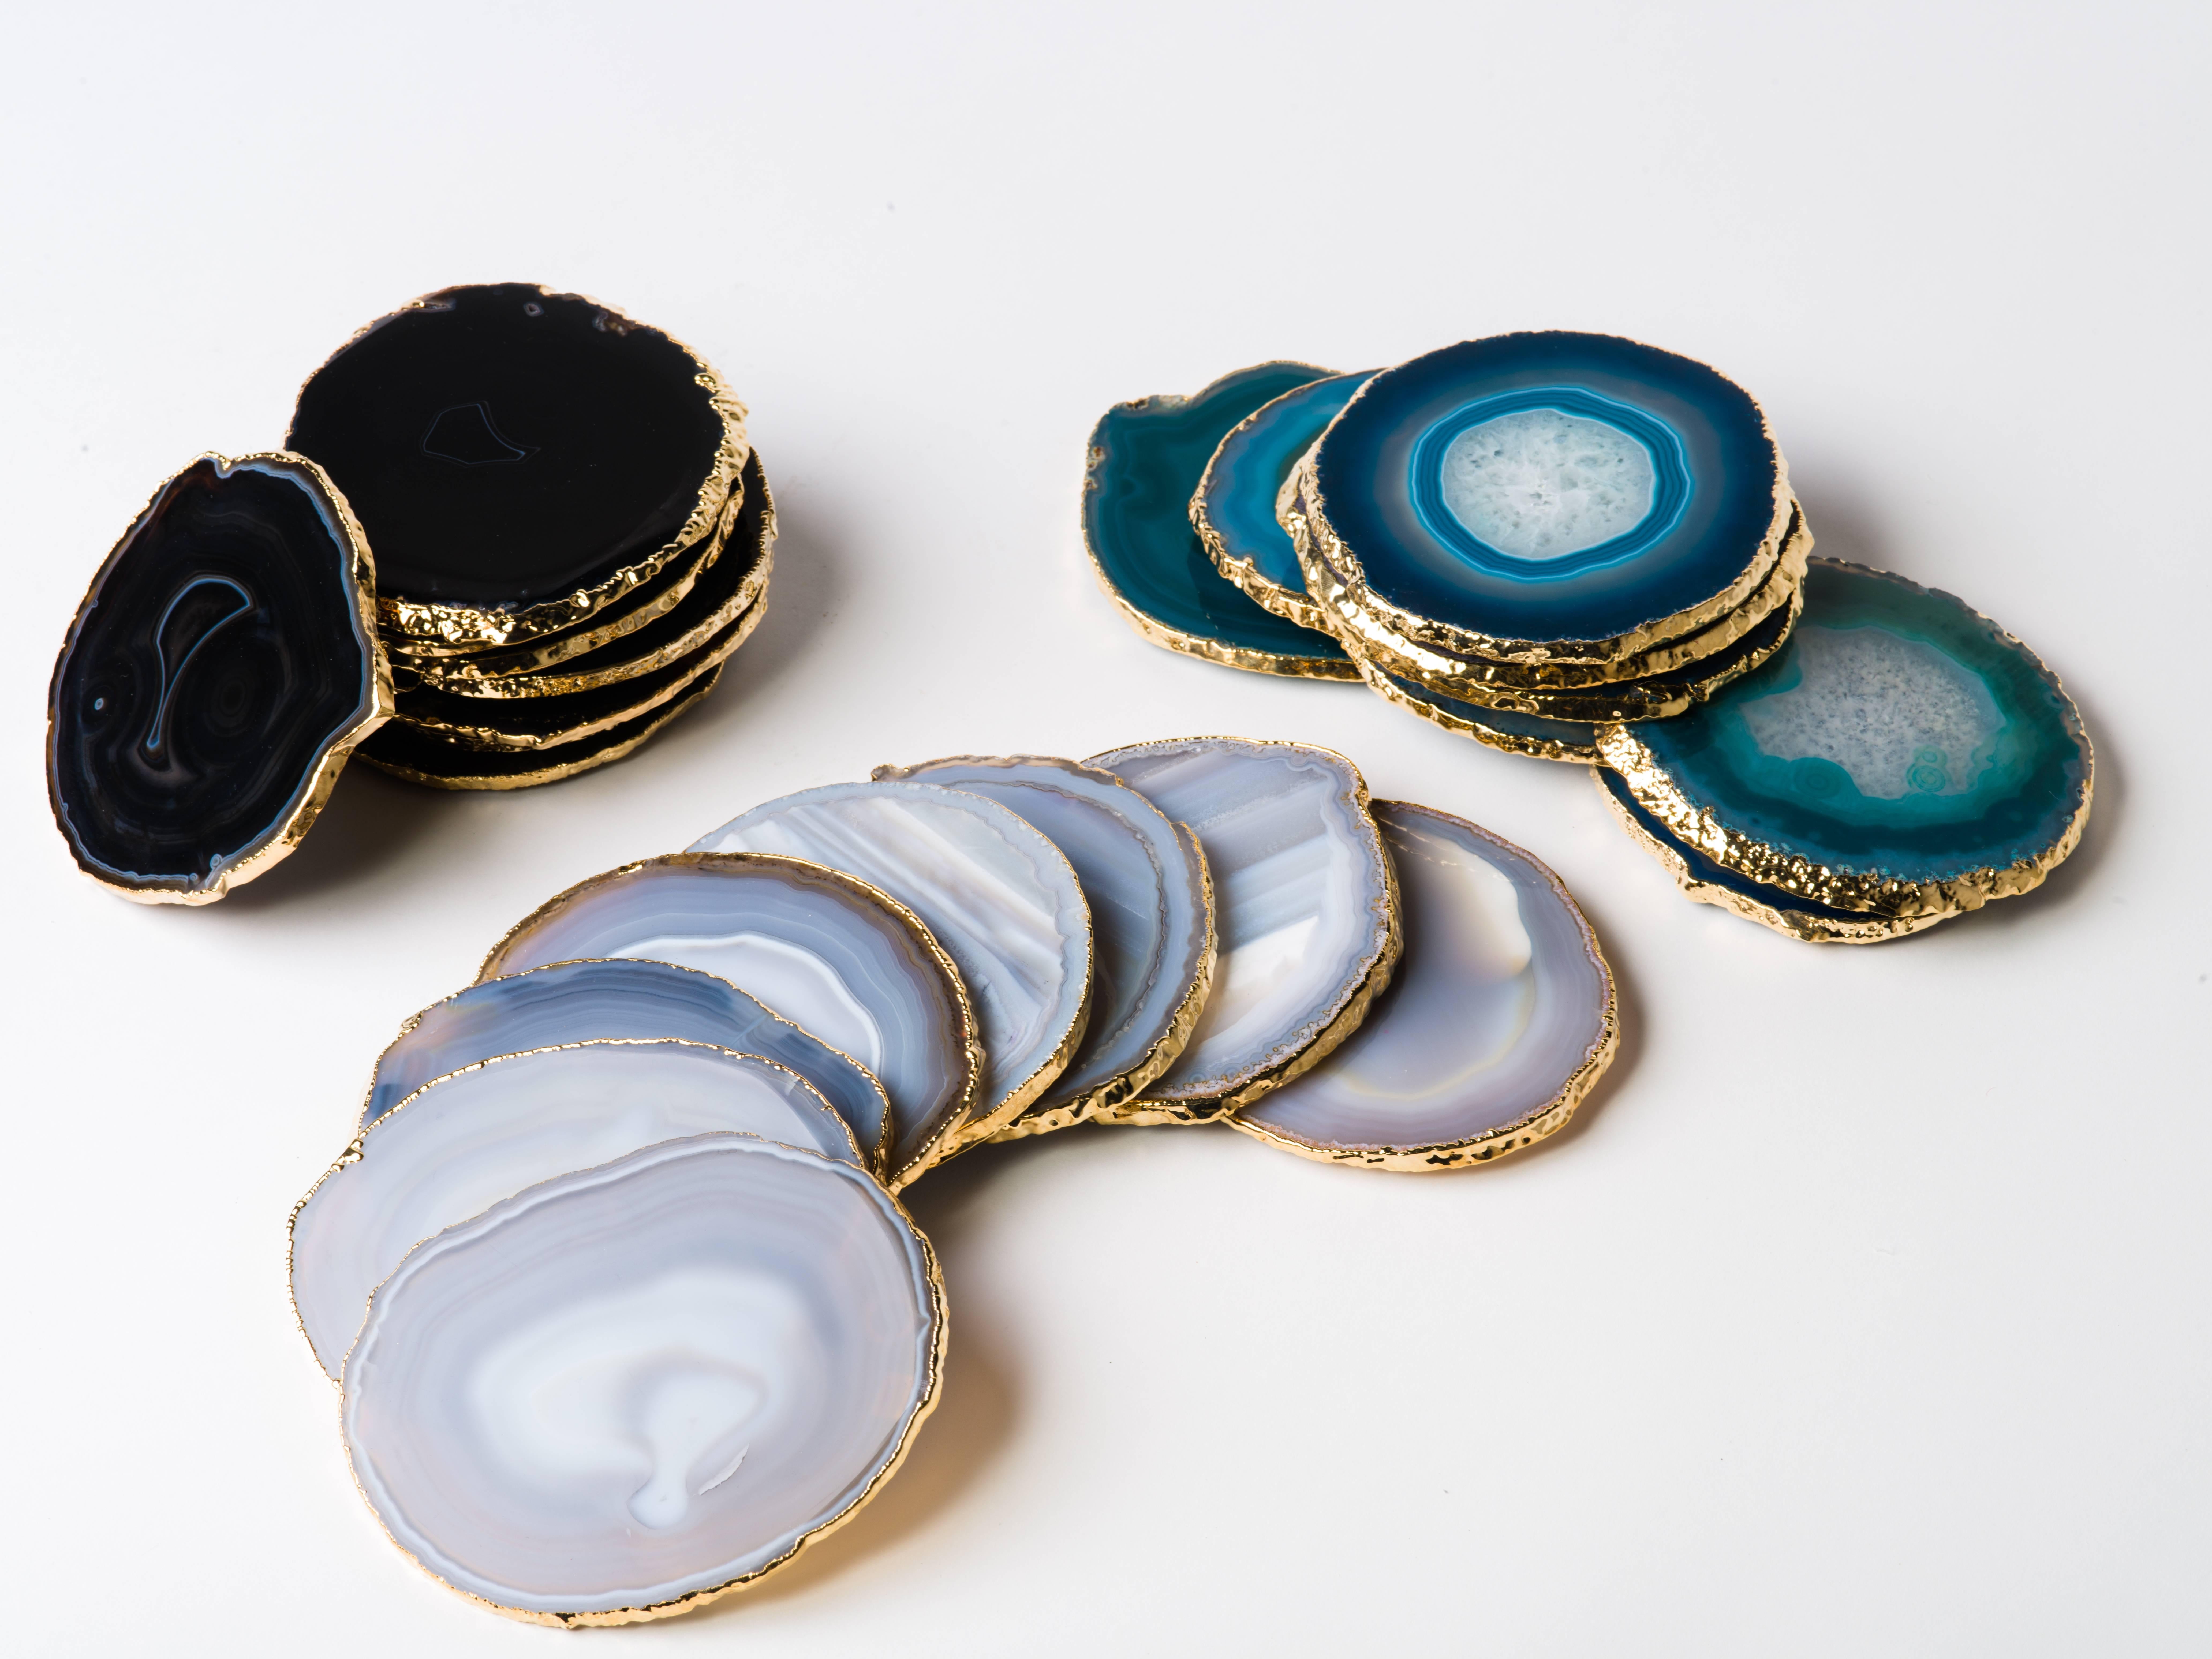 Natural Agate and Crystal Coasters in Teal with 24-Karat Gold Trim, Set/8 For Sale 2